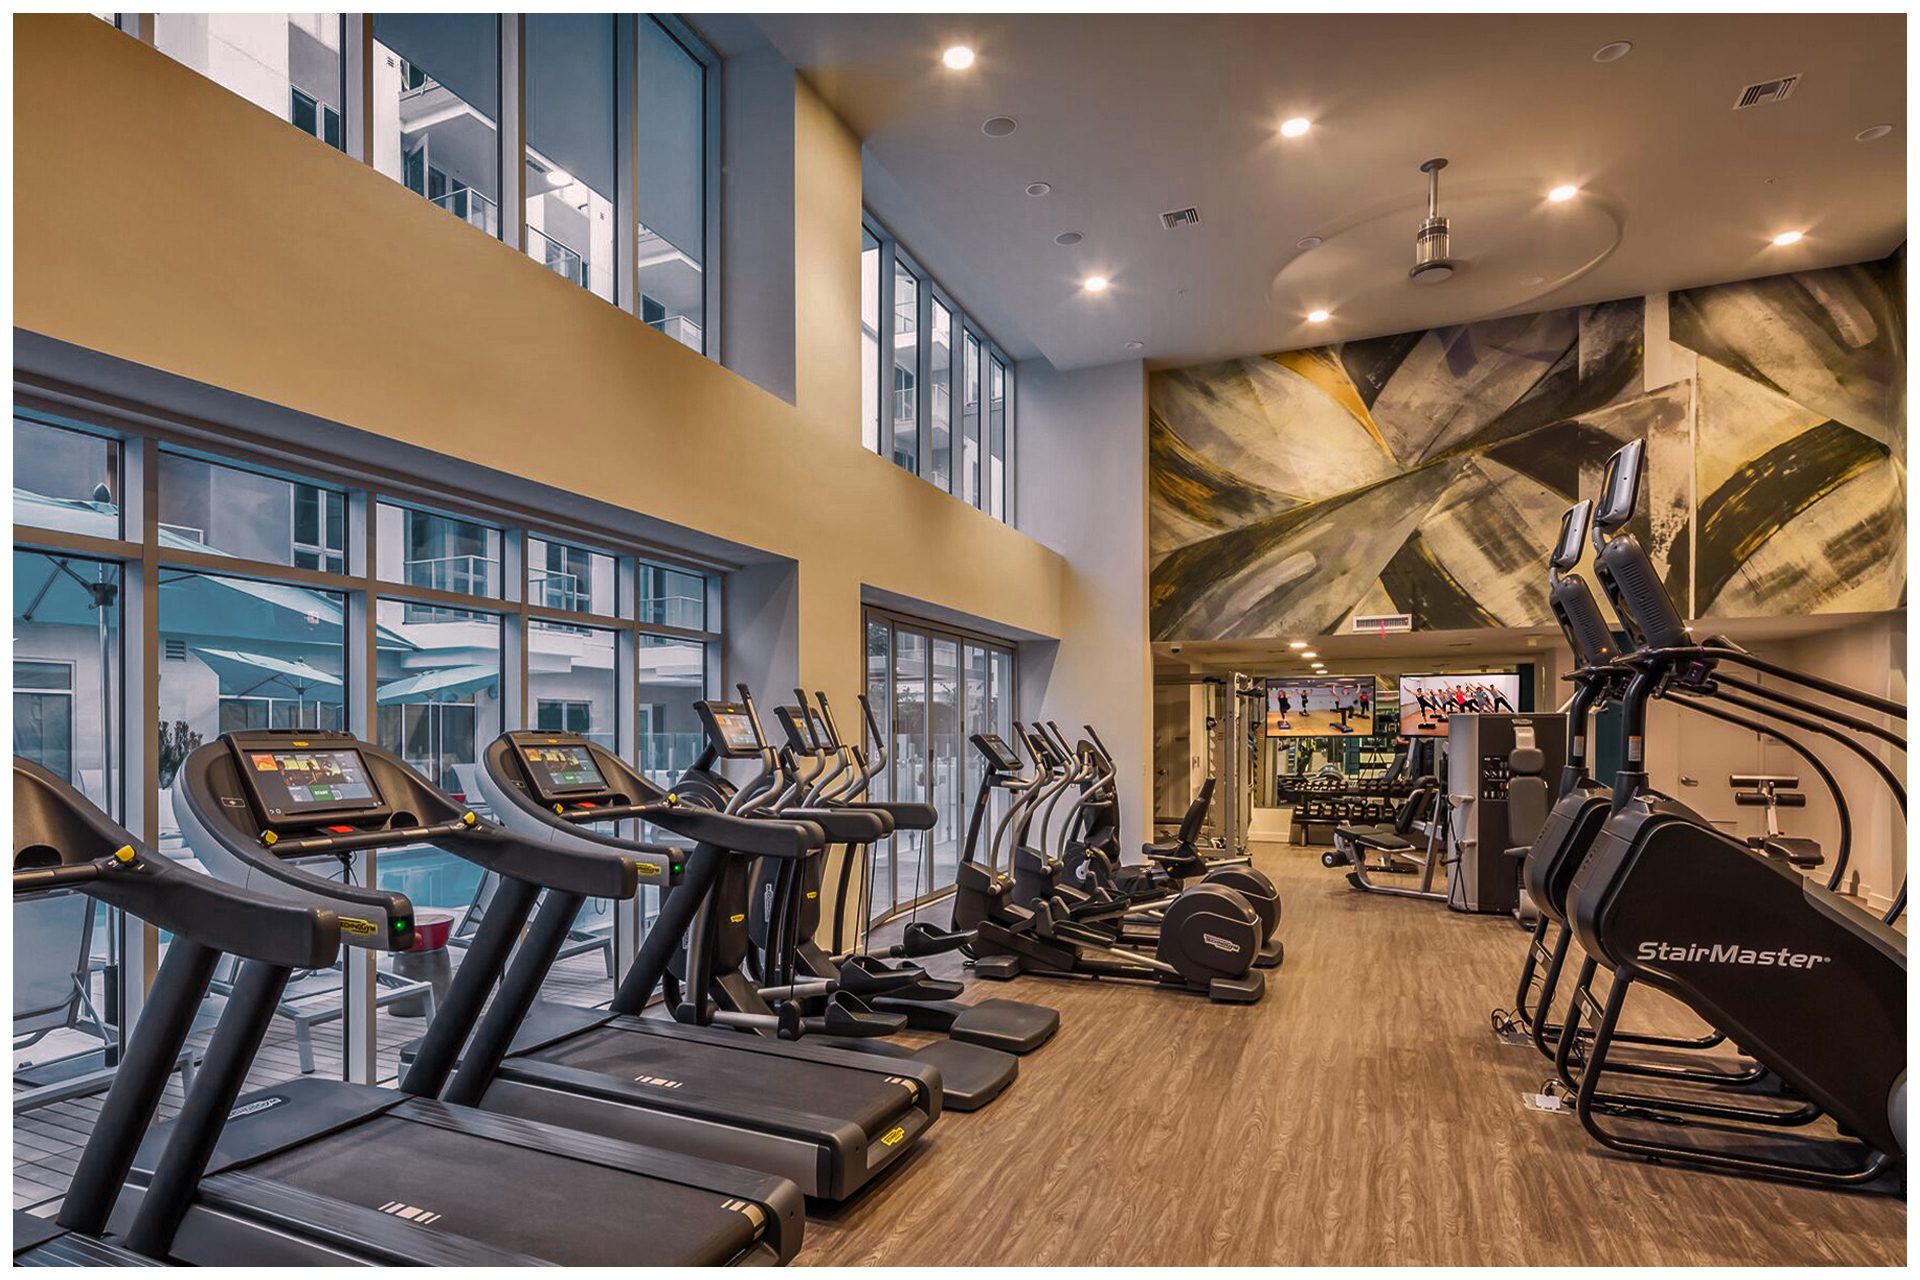 GYM AV PROVISIONSGym Audio Video & Enterprise Grade WiFi. Audio Video provisions are controlled via an in-room wall-mounted iPad and remotely from leasing office iPad.